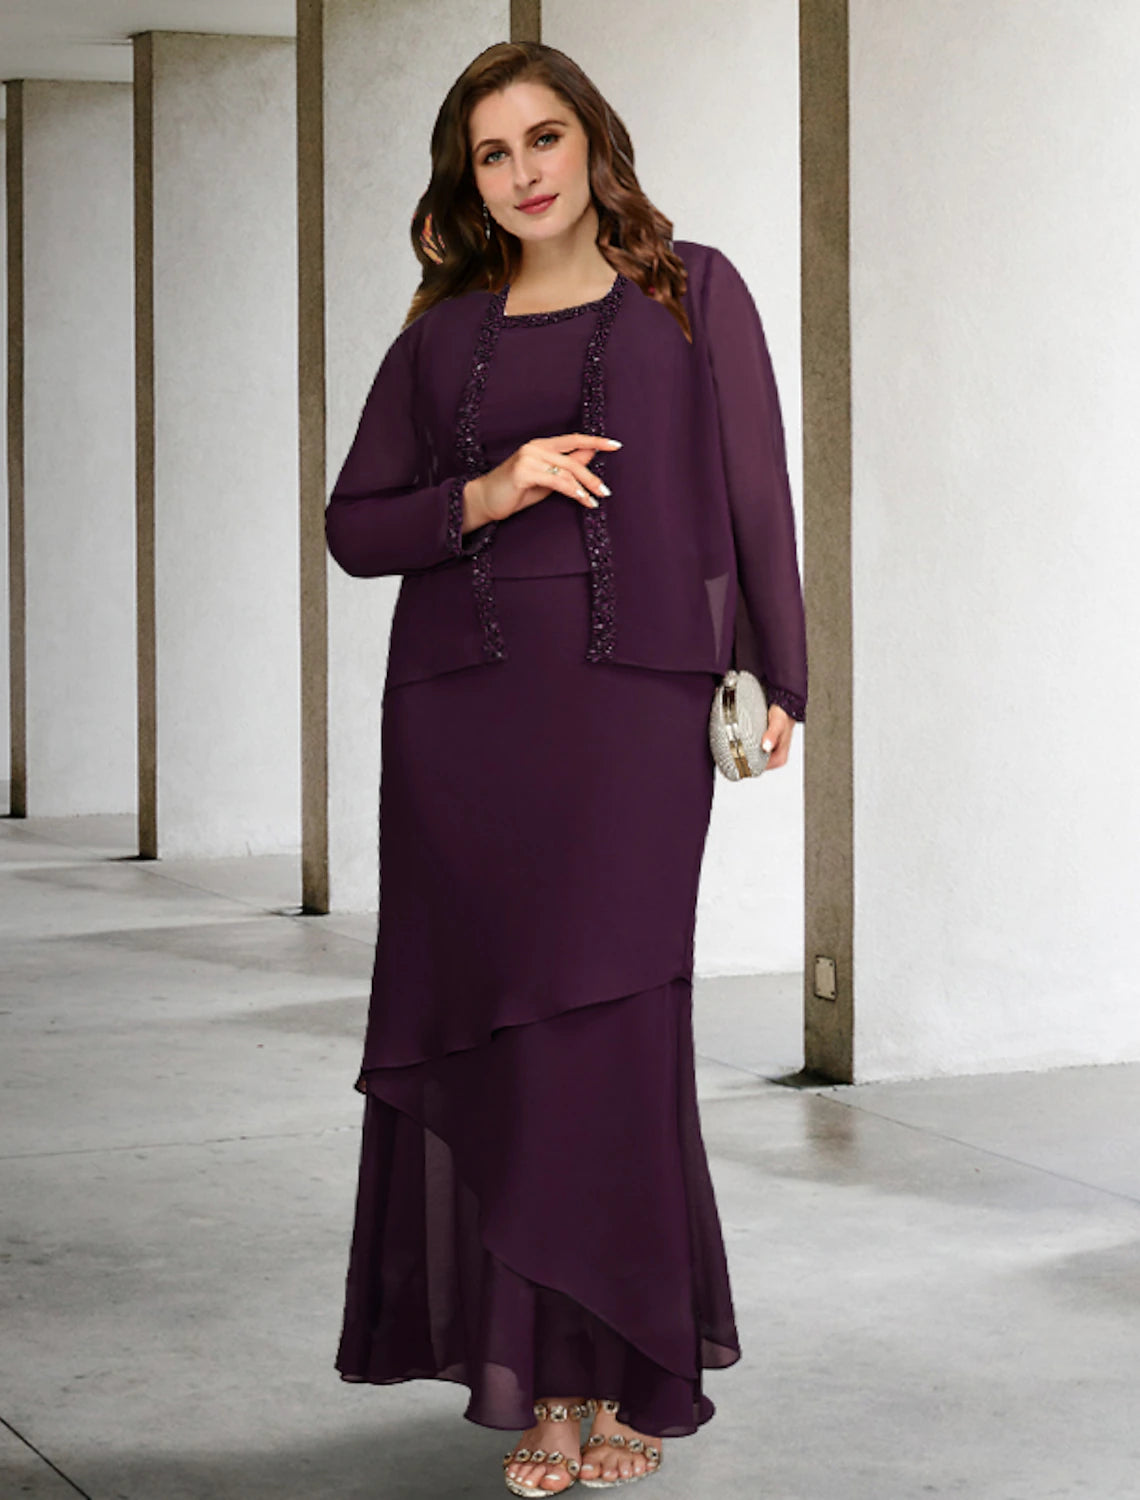 Two Piece A-Line Mother of the Bride Dresses Plus Size Hide Belly Curve Elegant Dress Formal Ankle Length Sleeveless Square Neck Chiffon with Beading Ruffles